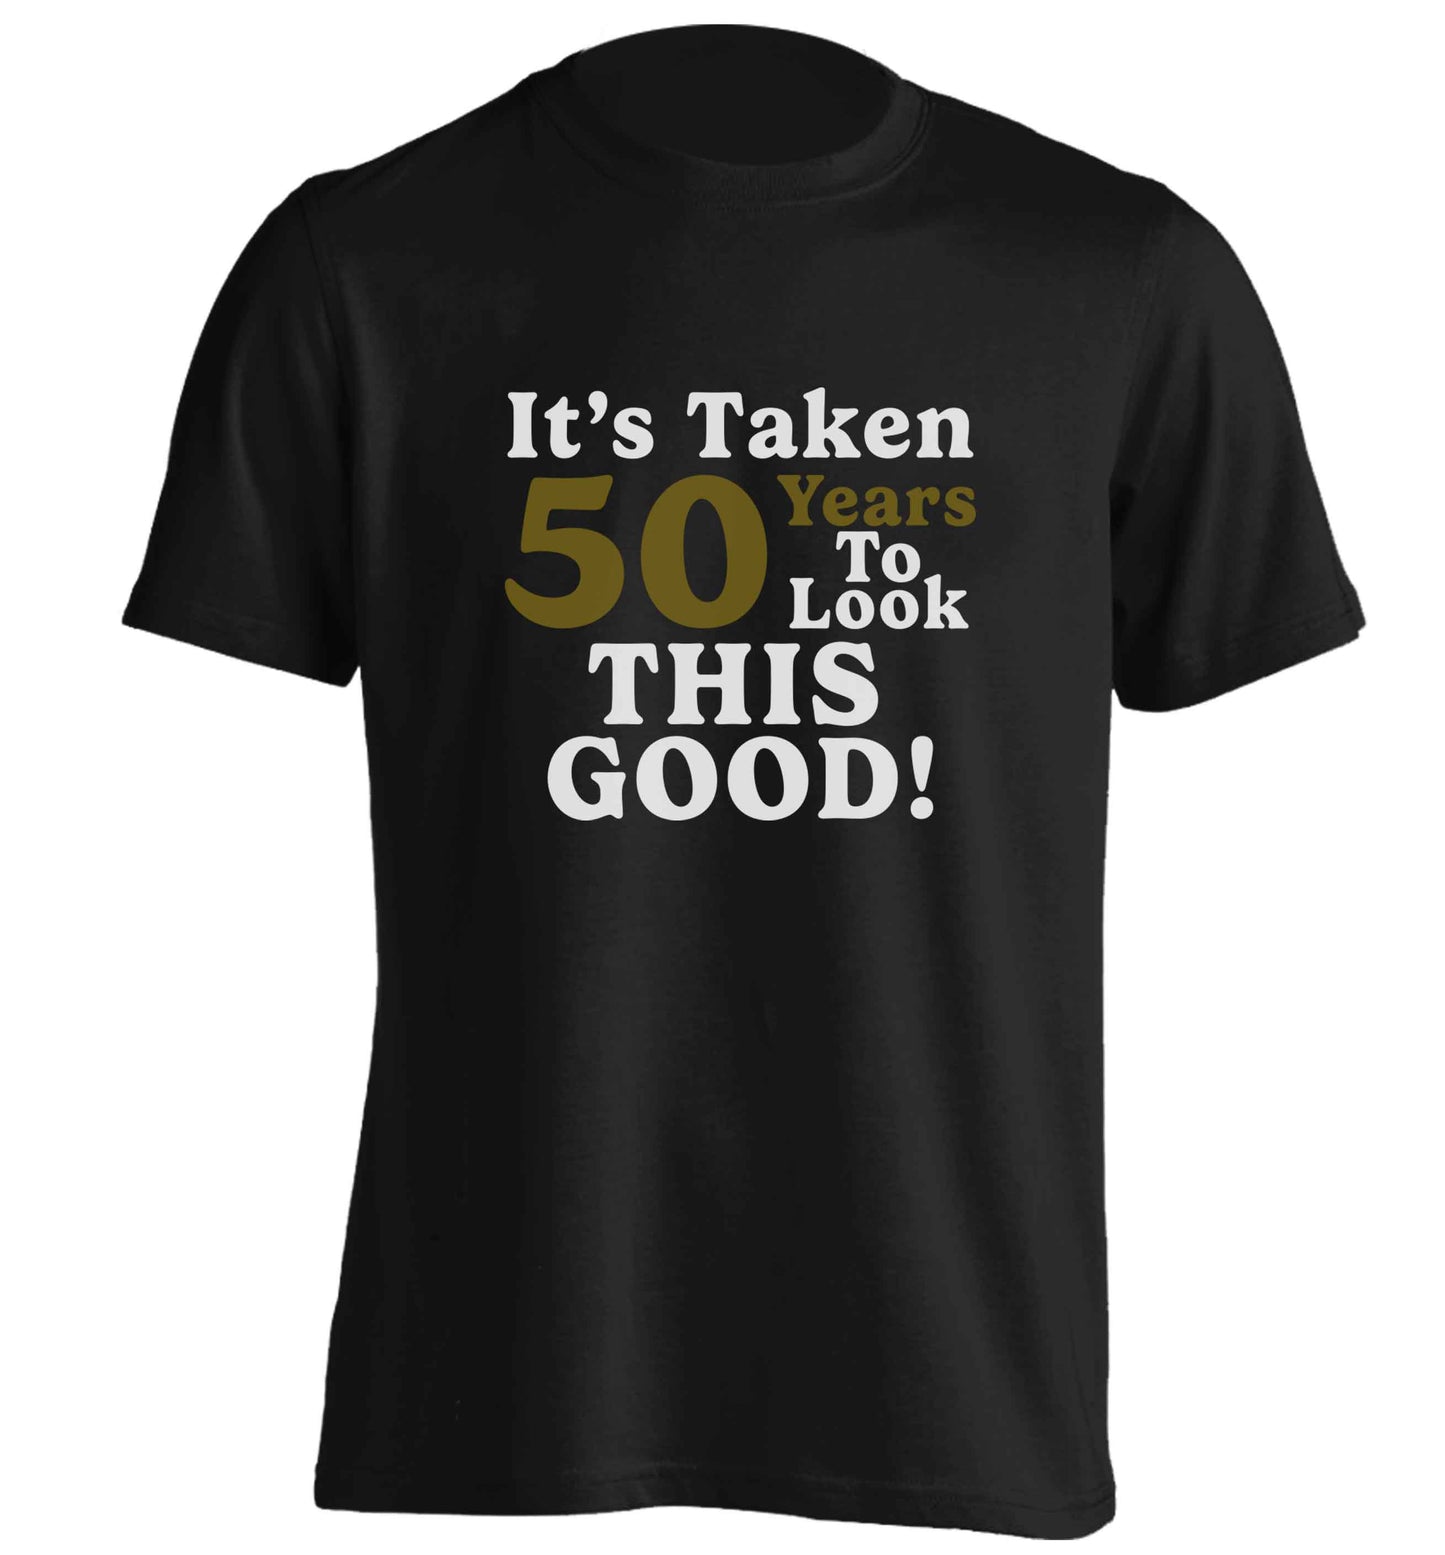 It's taken 50 years to look this good! adults unisex black Tshirt 2XL